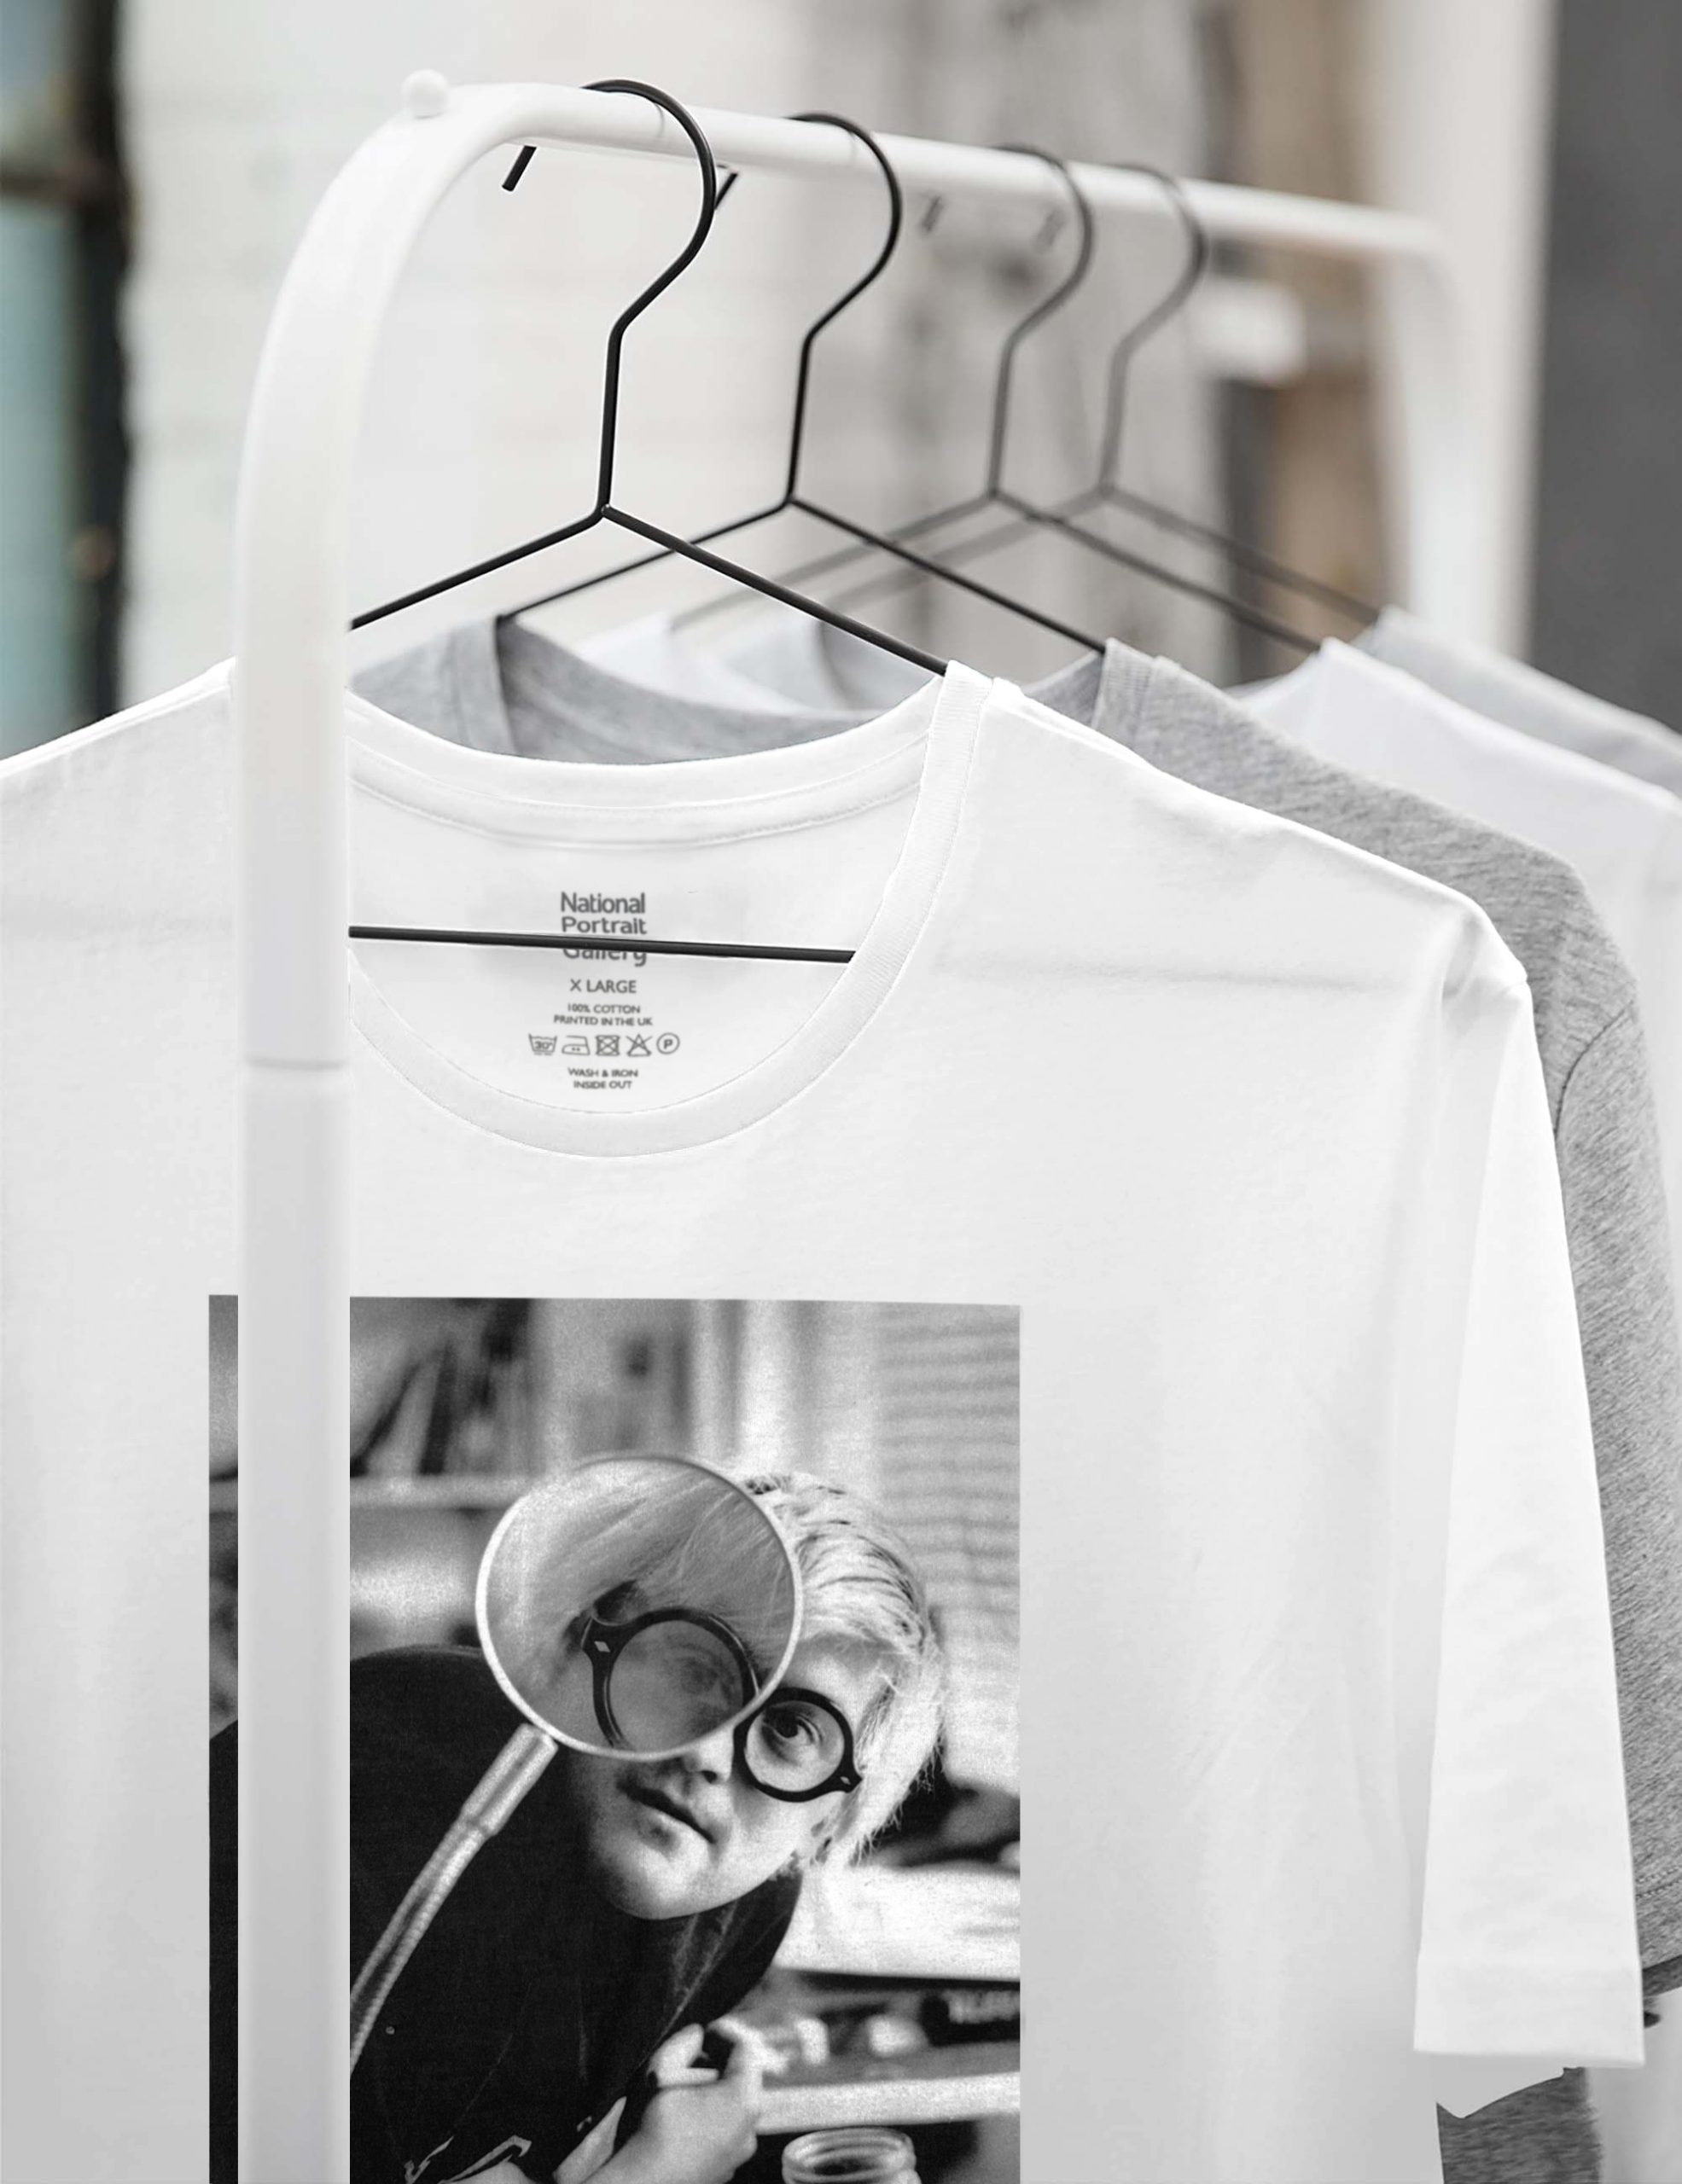 National Portrait Gallery – T-Shirt Printing